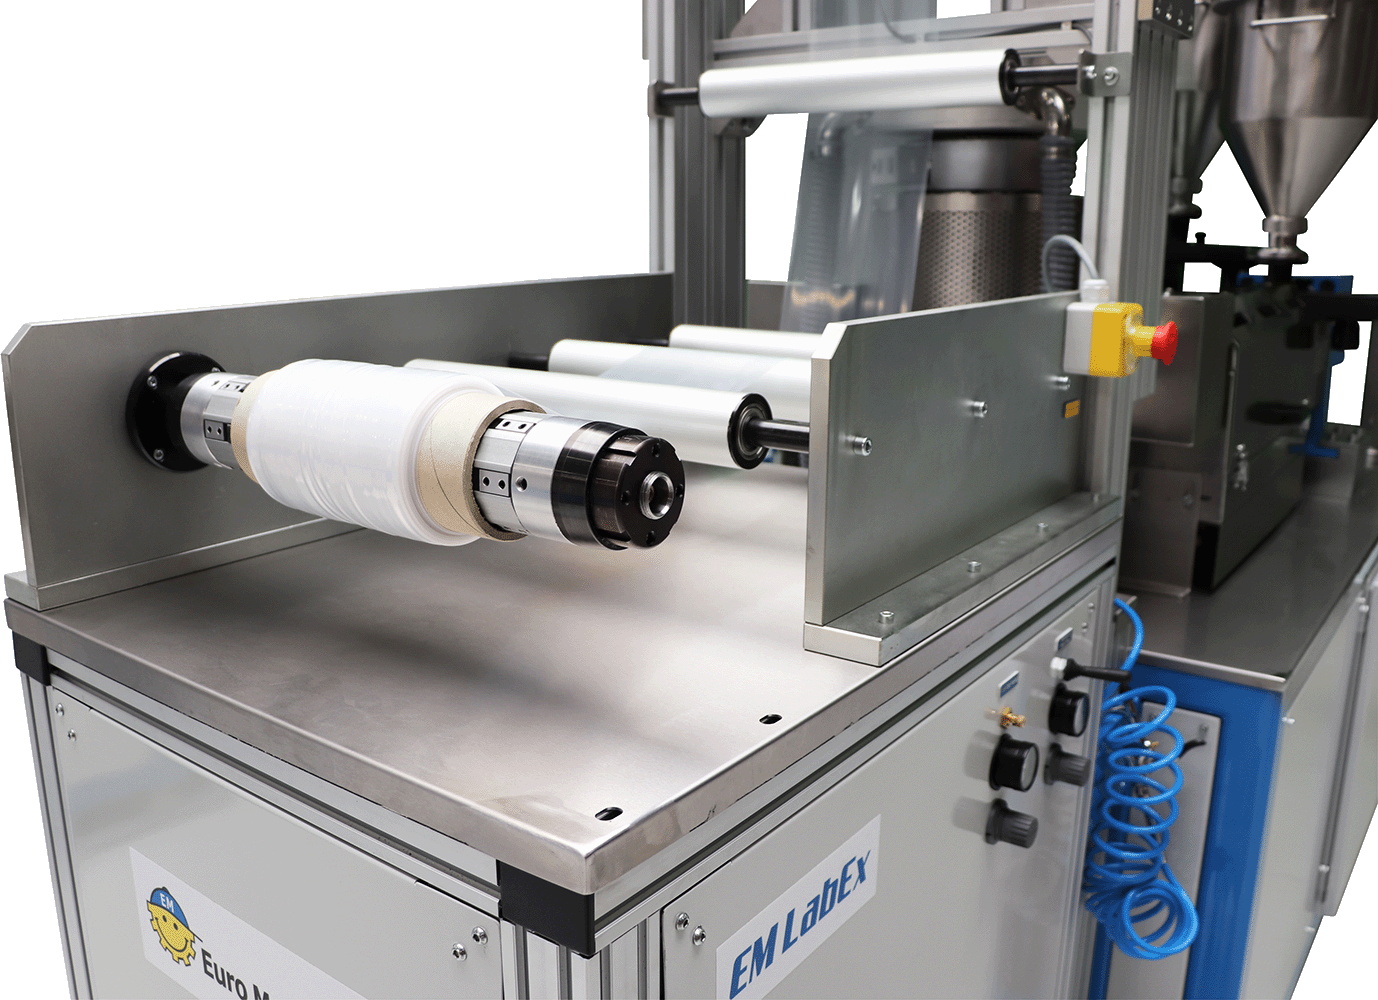 Winder roll-up on the EM LabEx lab extruder quality air shafts